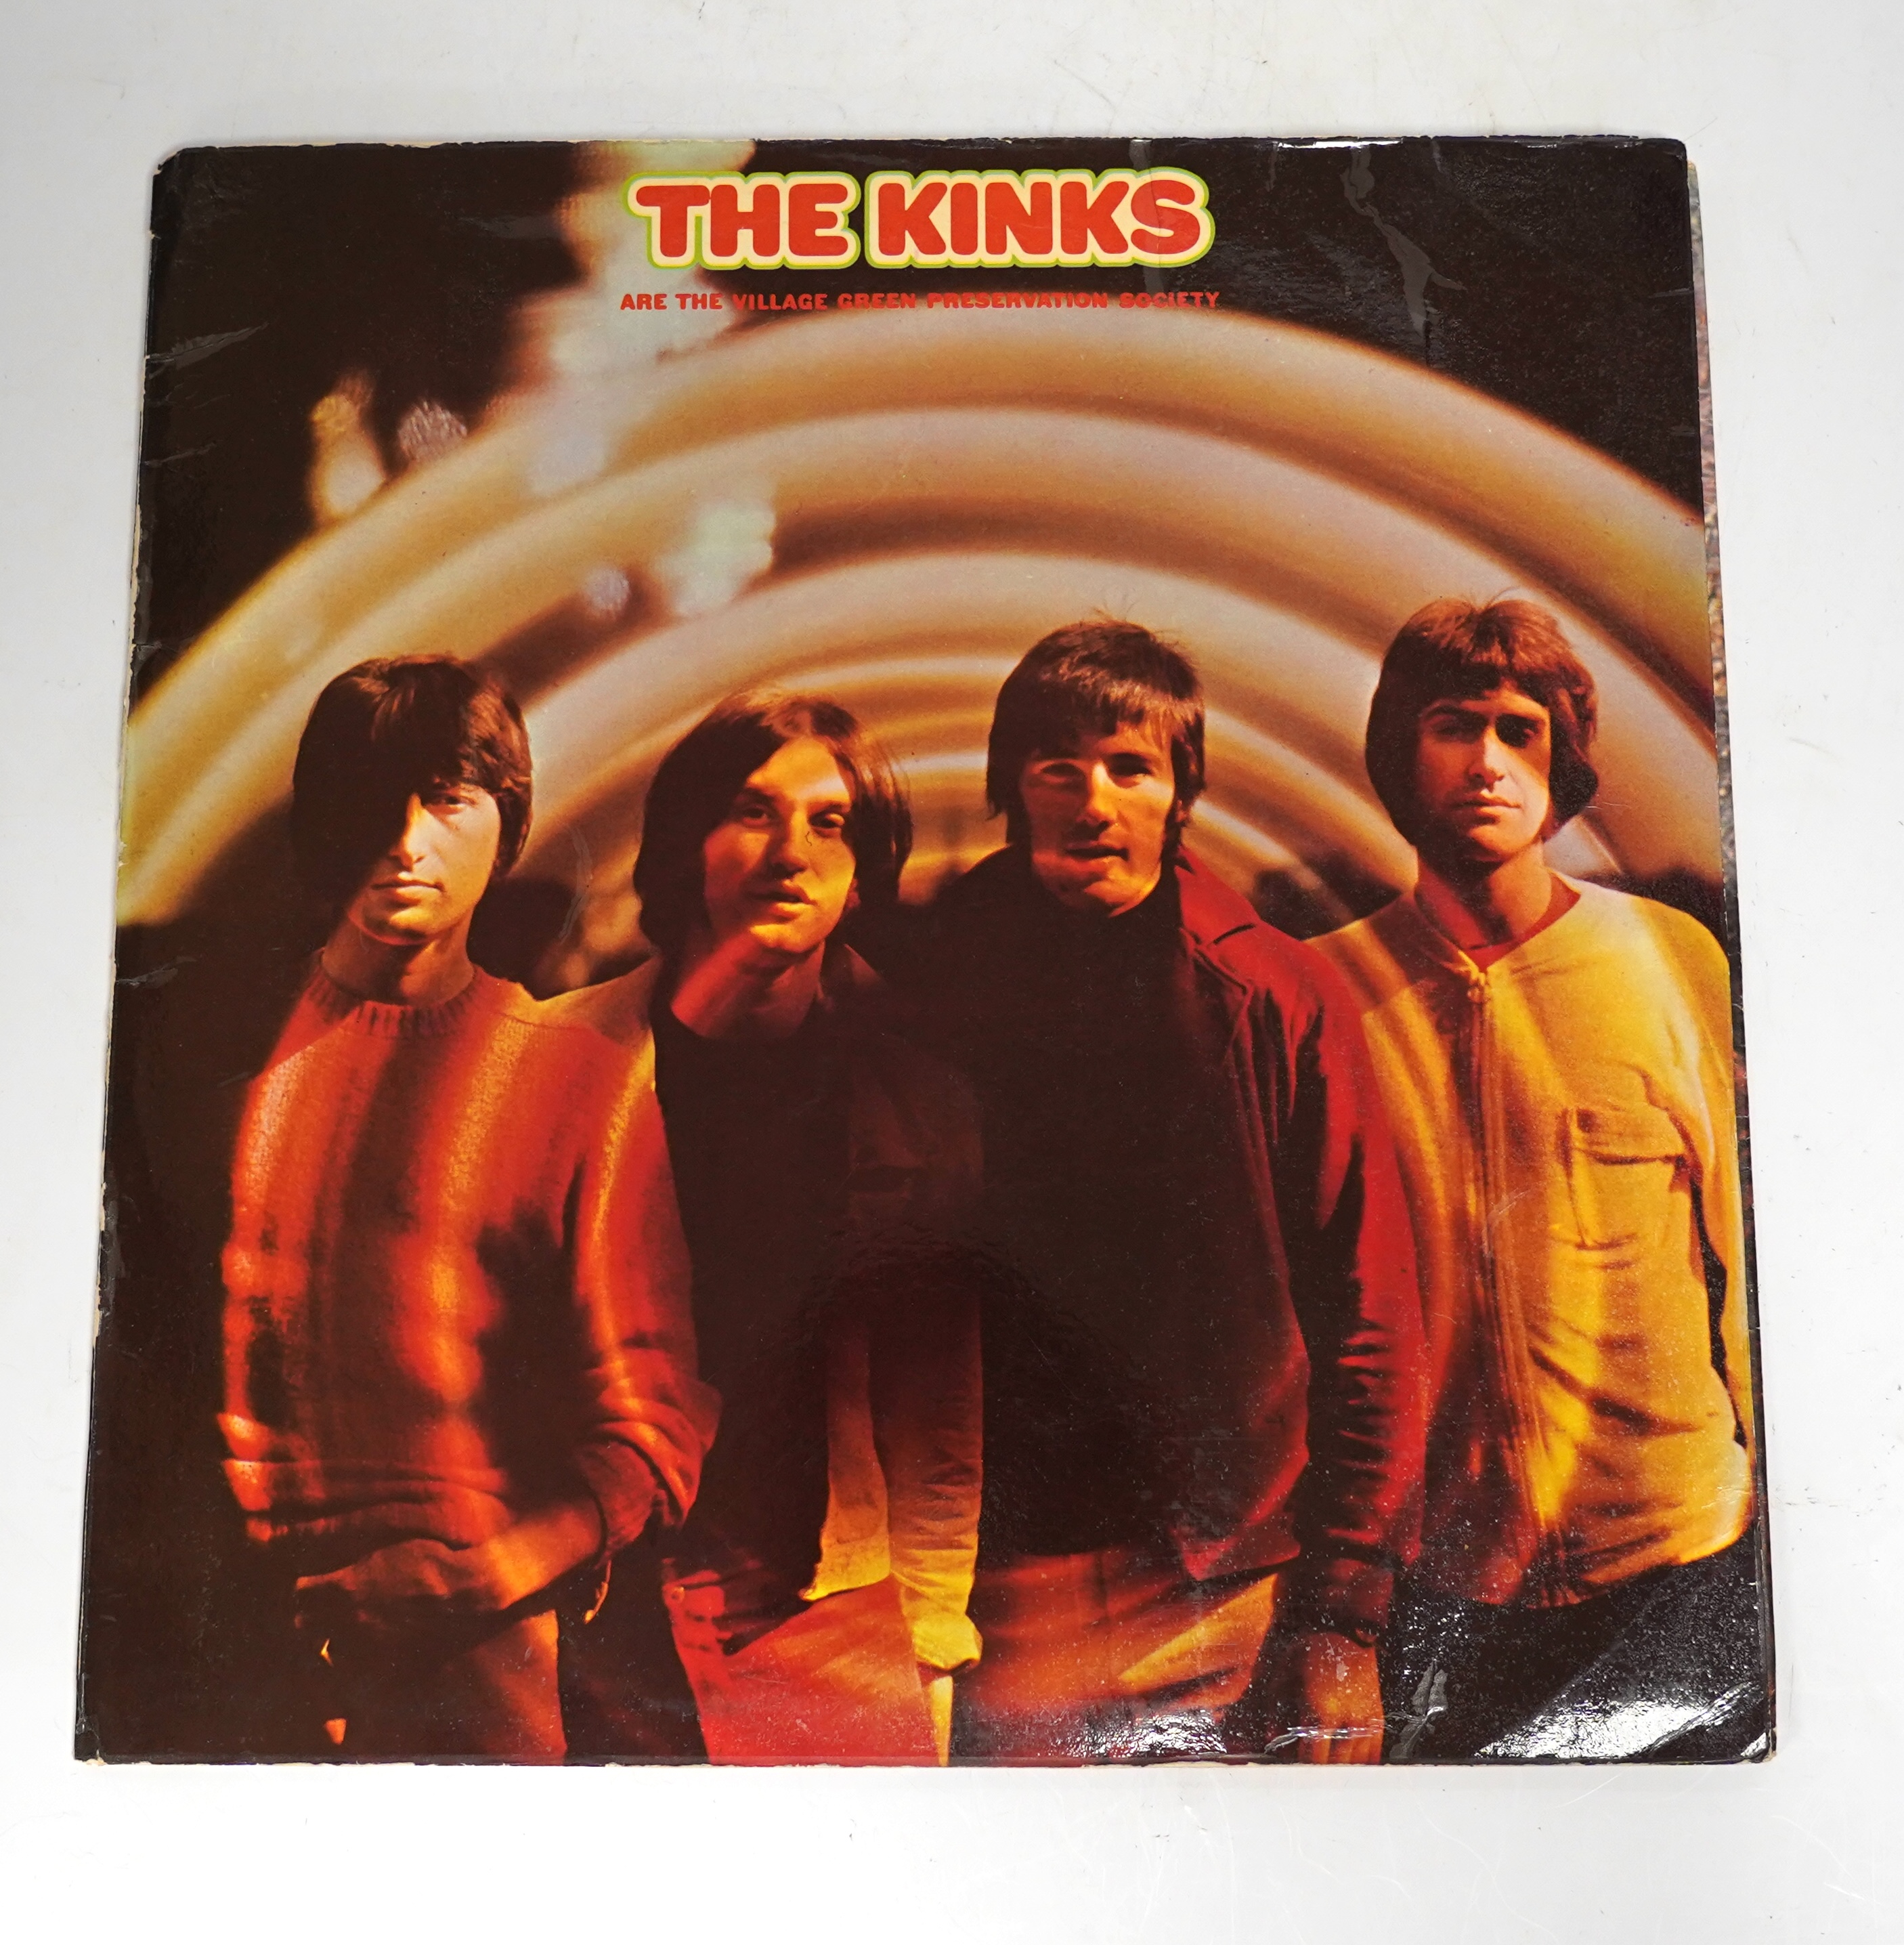 The Kinks LP record album; Are the Village Green Preservation Society, in Mono on blue and black Pye label, NPL.18233